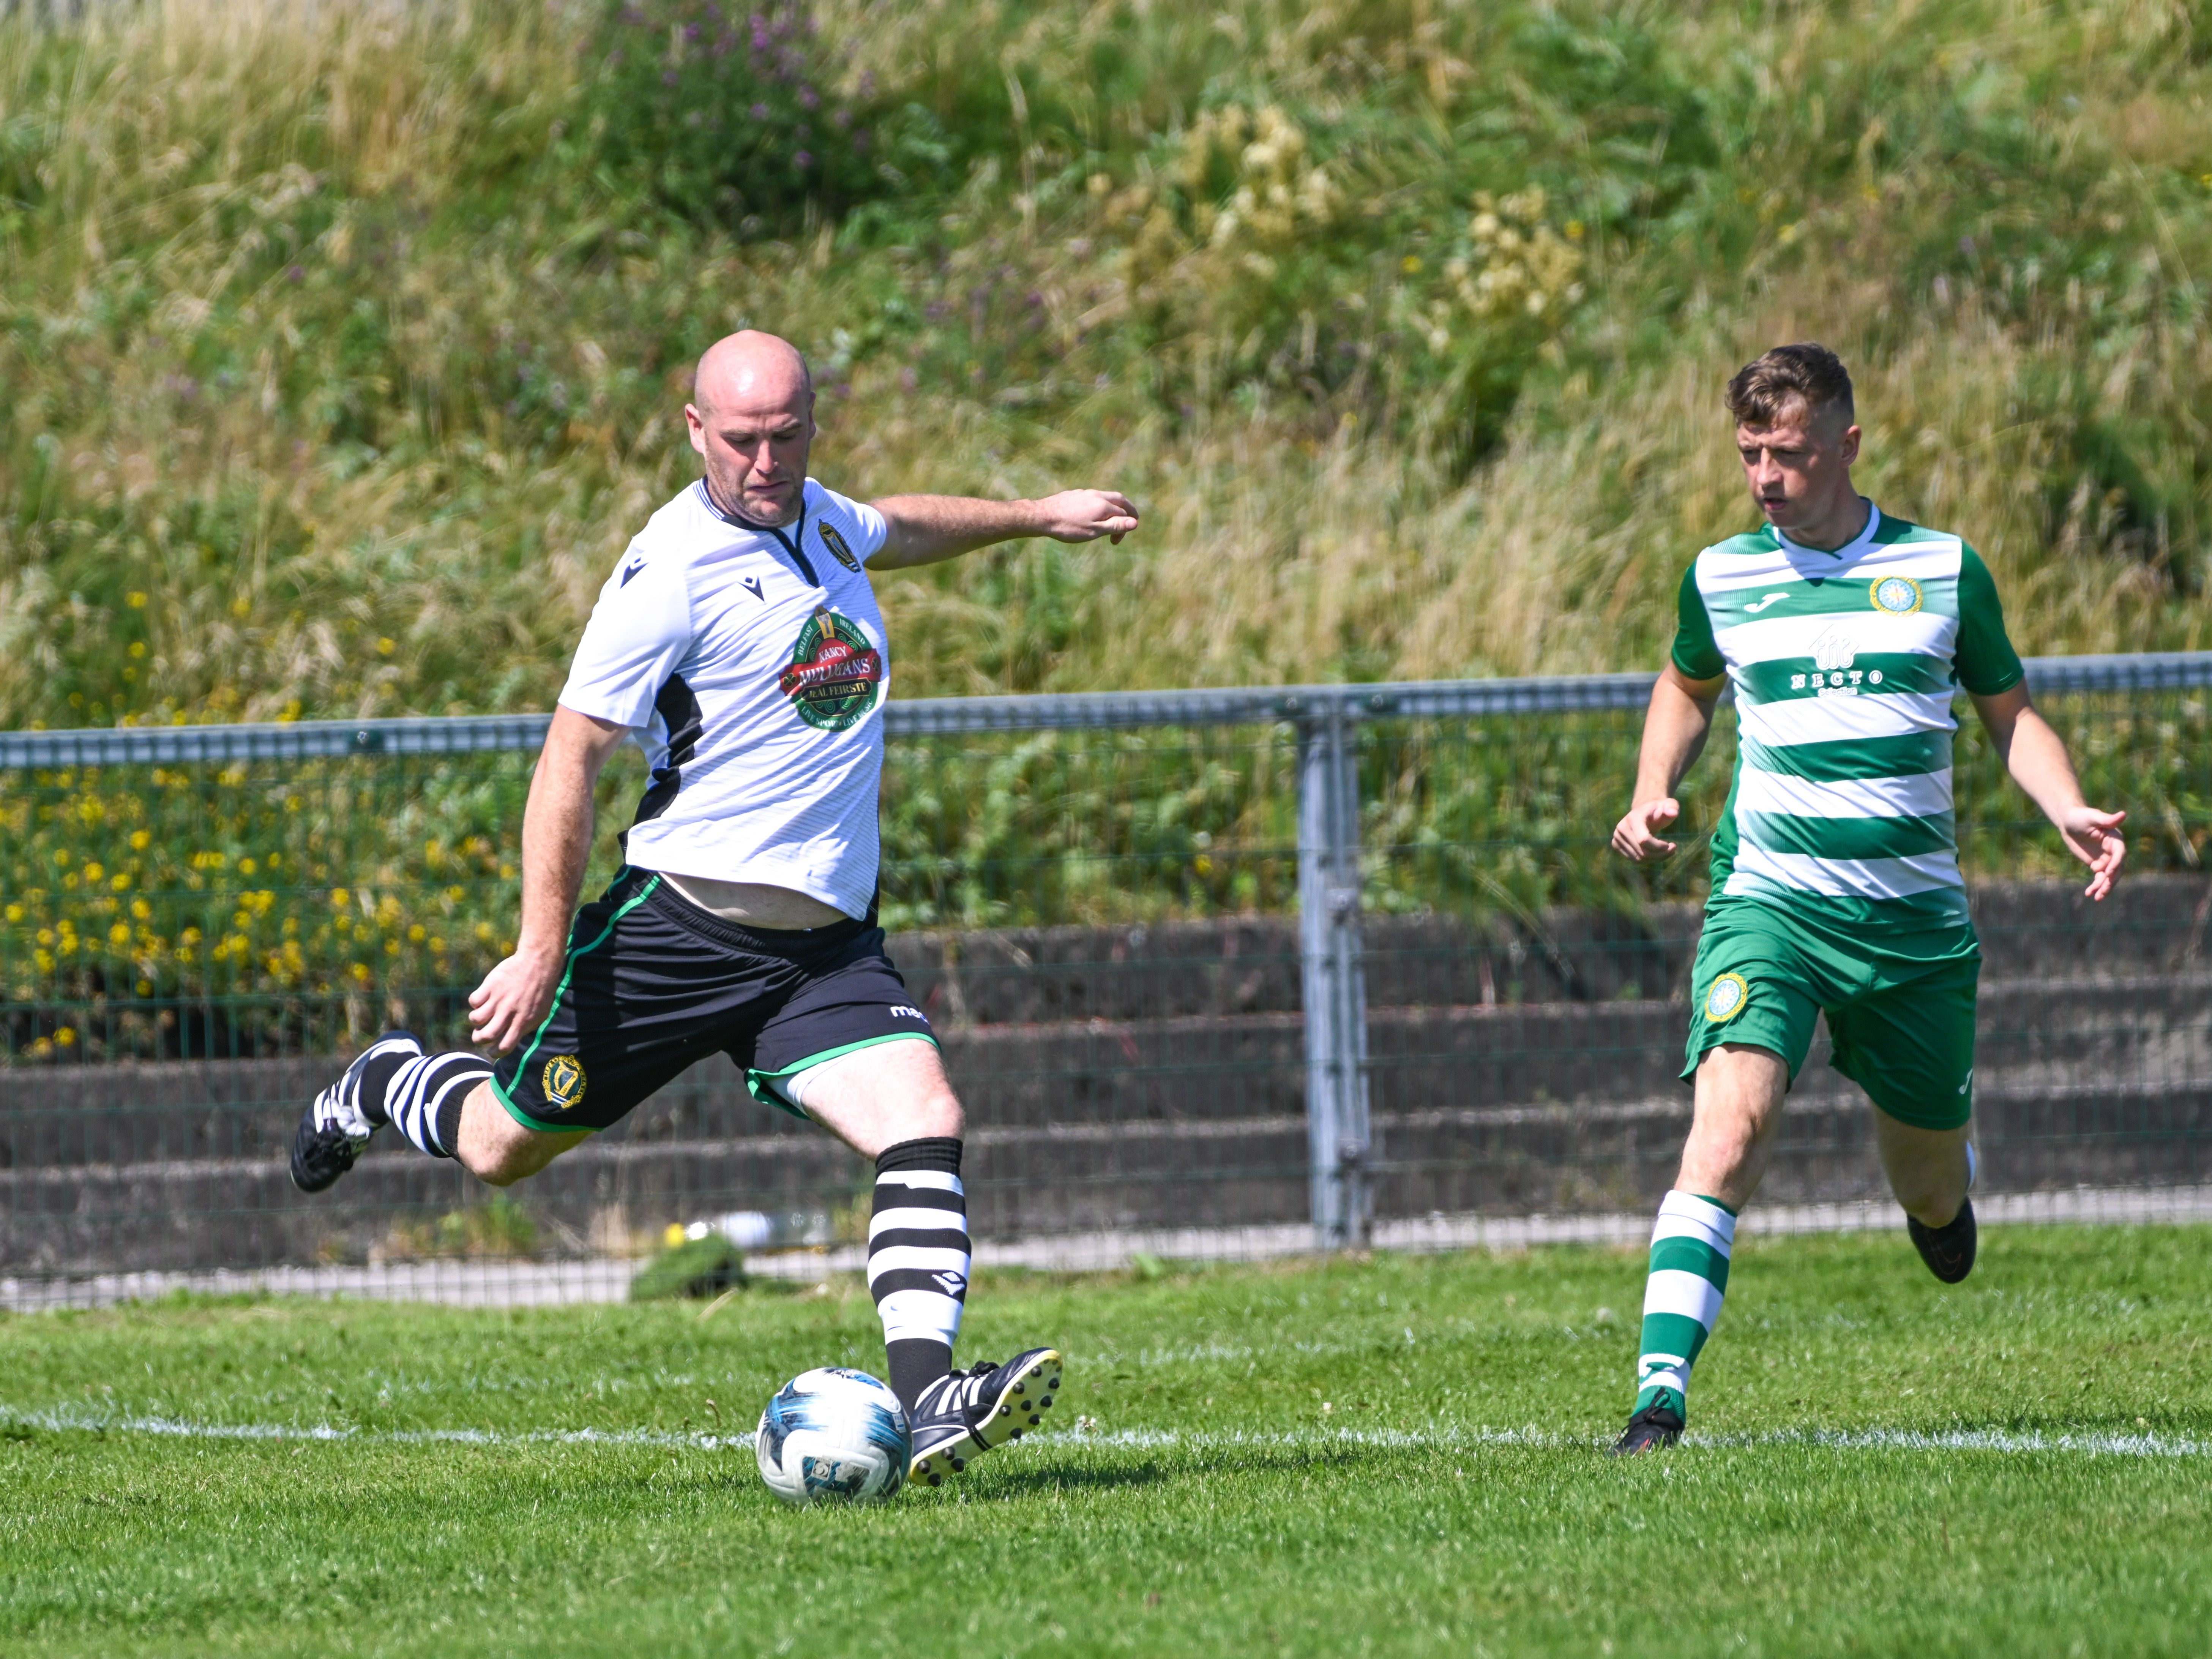 ALL FOR PLAY: The match was evenly fought, with Belfast Celtic coming out the victor.